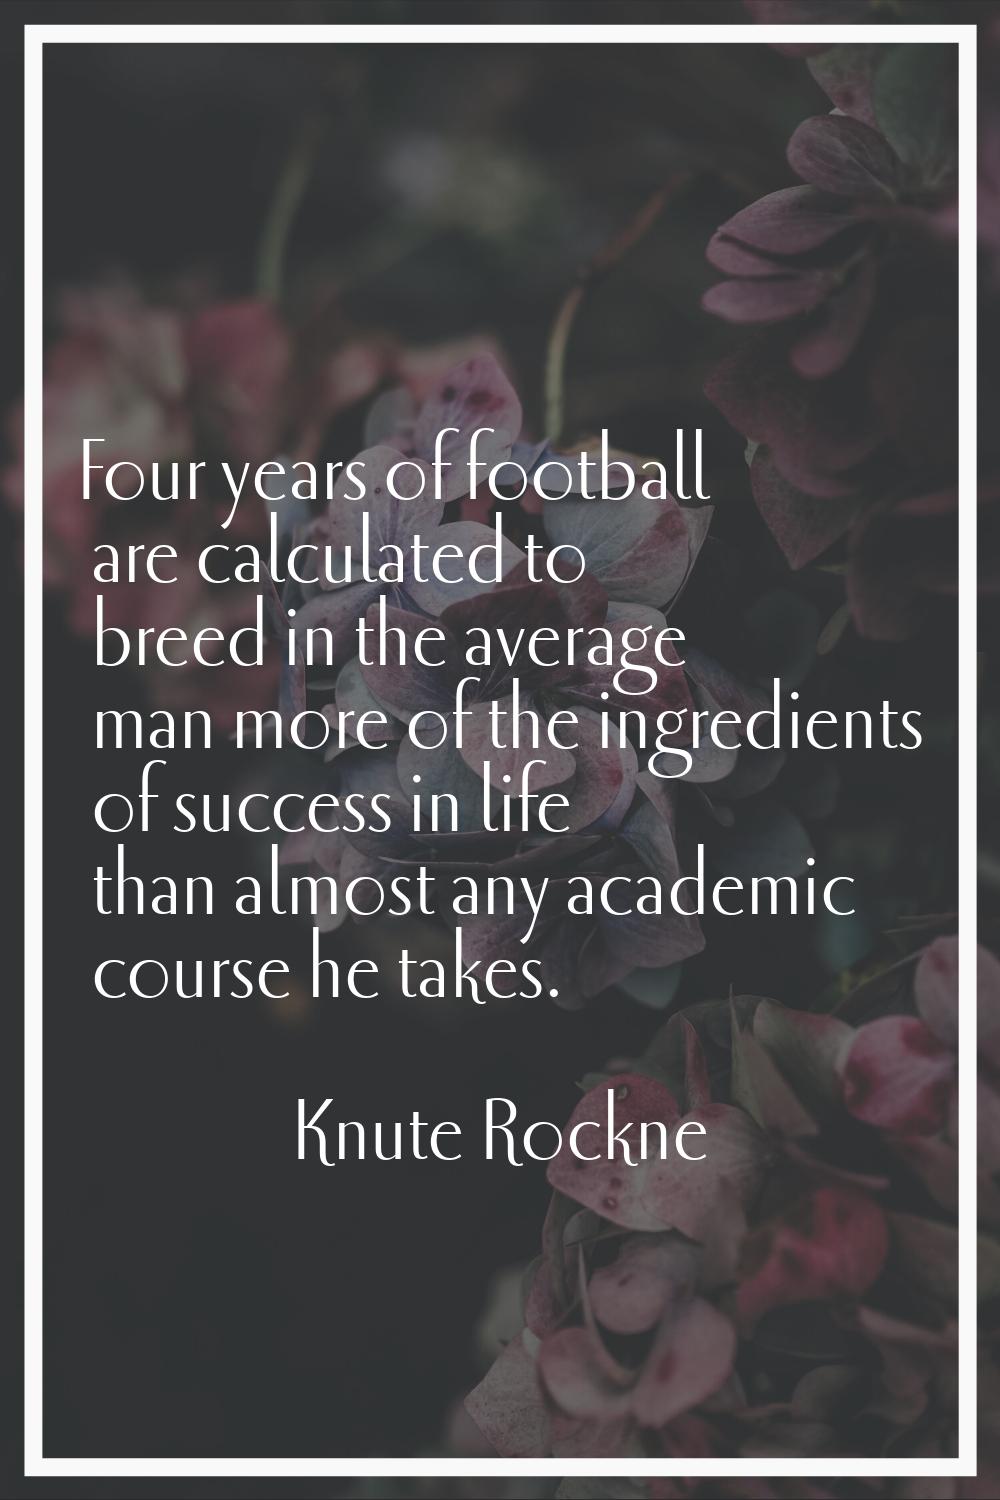 Four years of football are calculated to breed in the average man more of the ingredients of succes